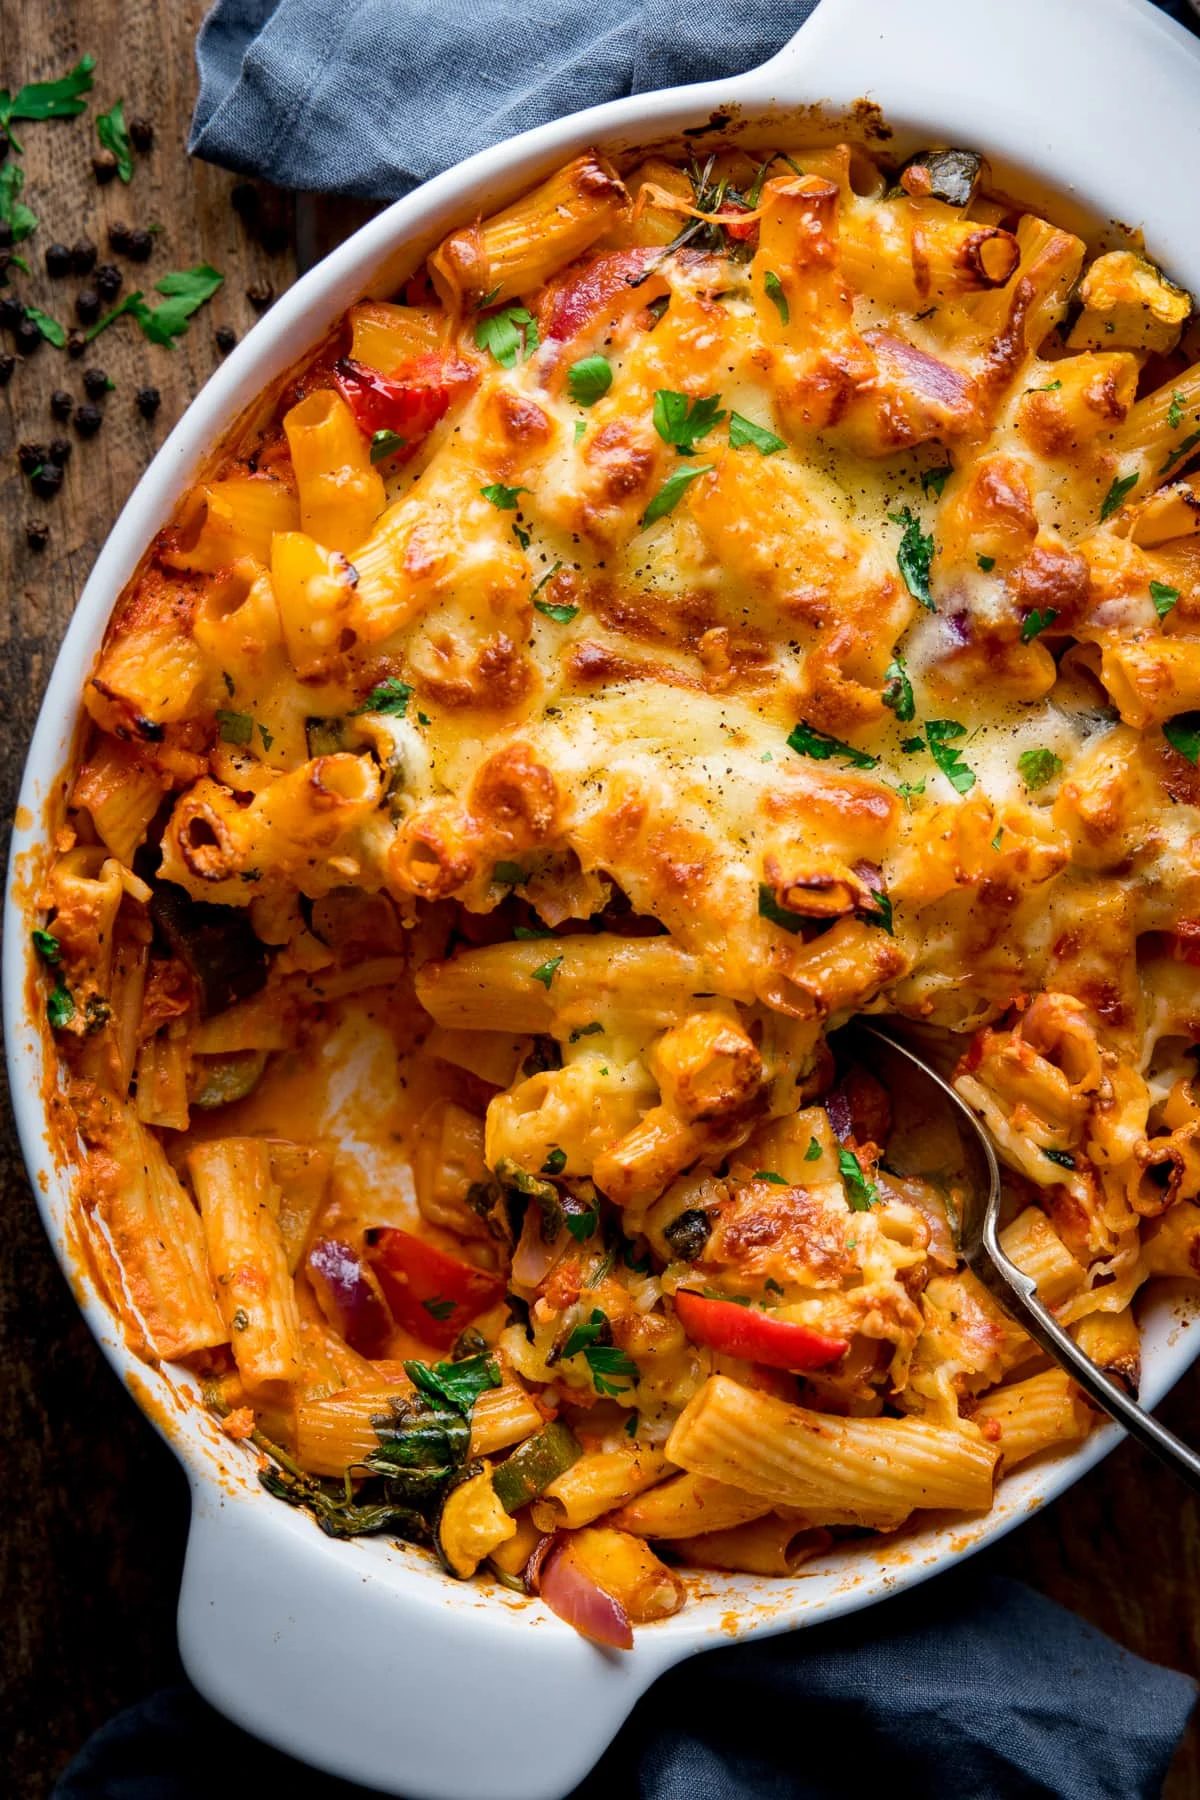 Overhead image of vegetable pasta bake with a spoonful taken out